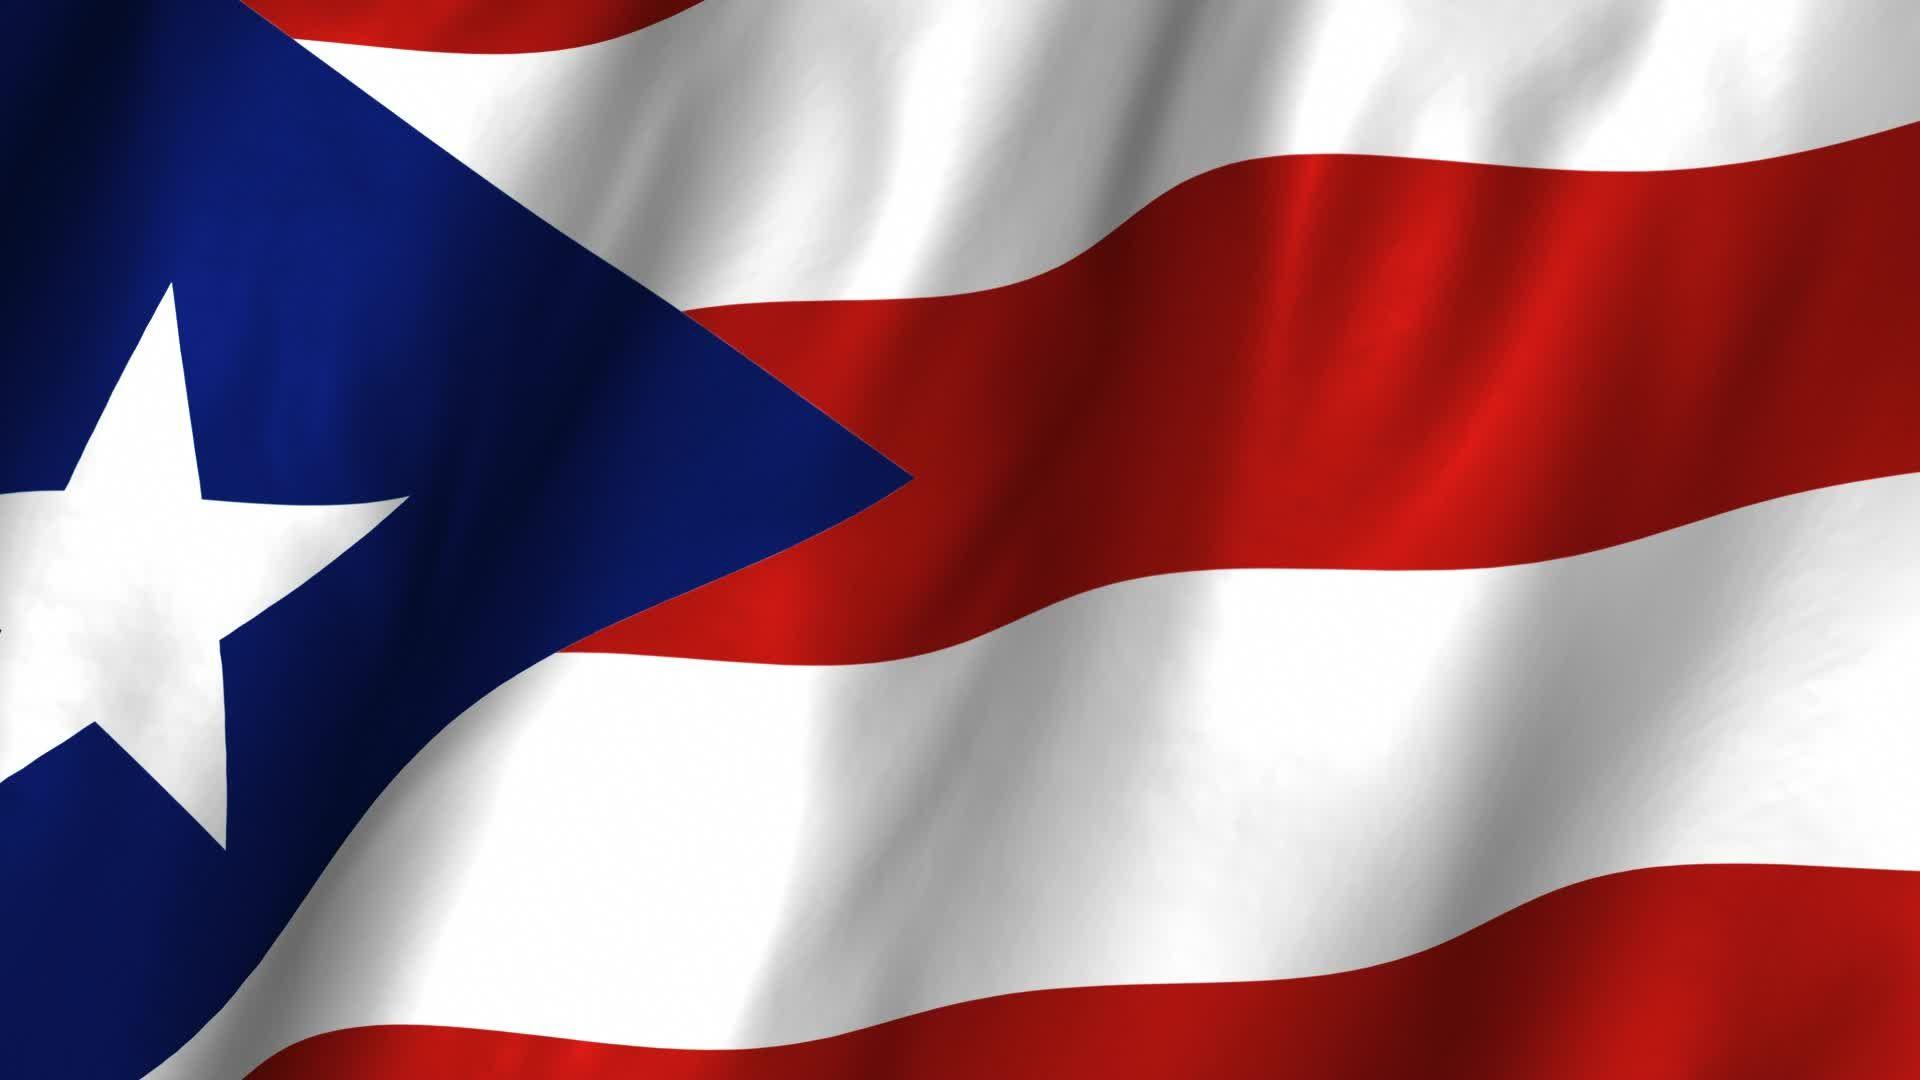 Puerto Rico Flag Wallpapers Top Free Puerto Rico Flag Backgrounds Wallpaperaccess